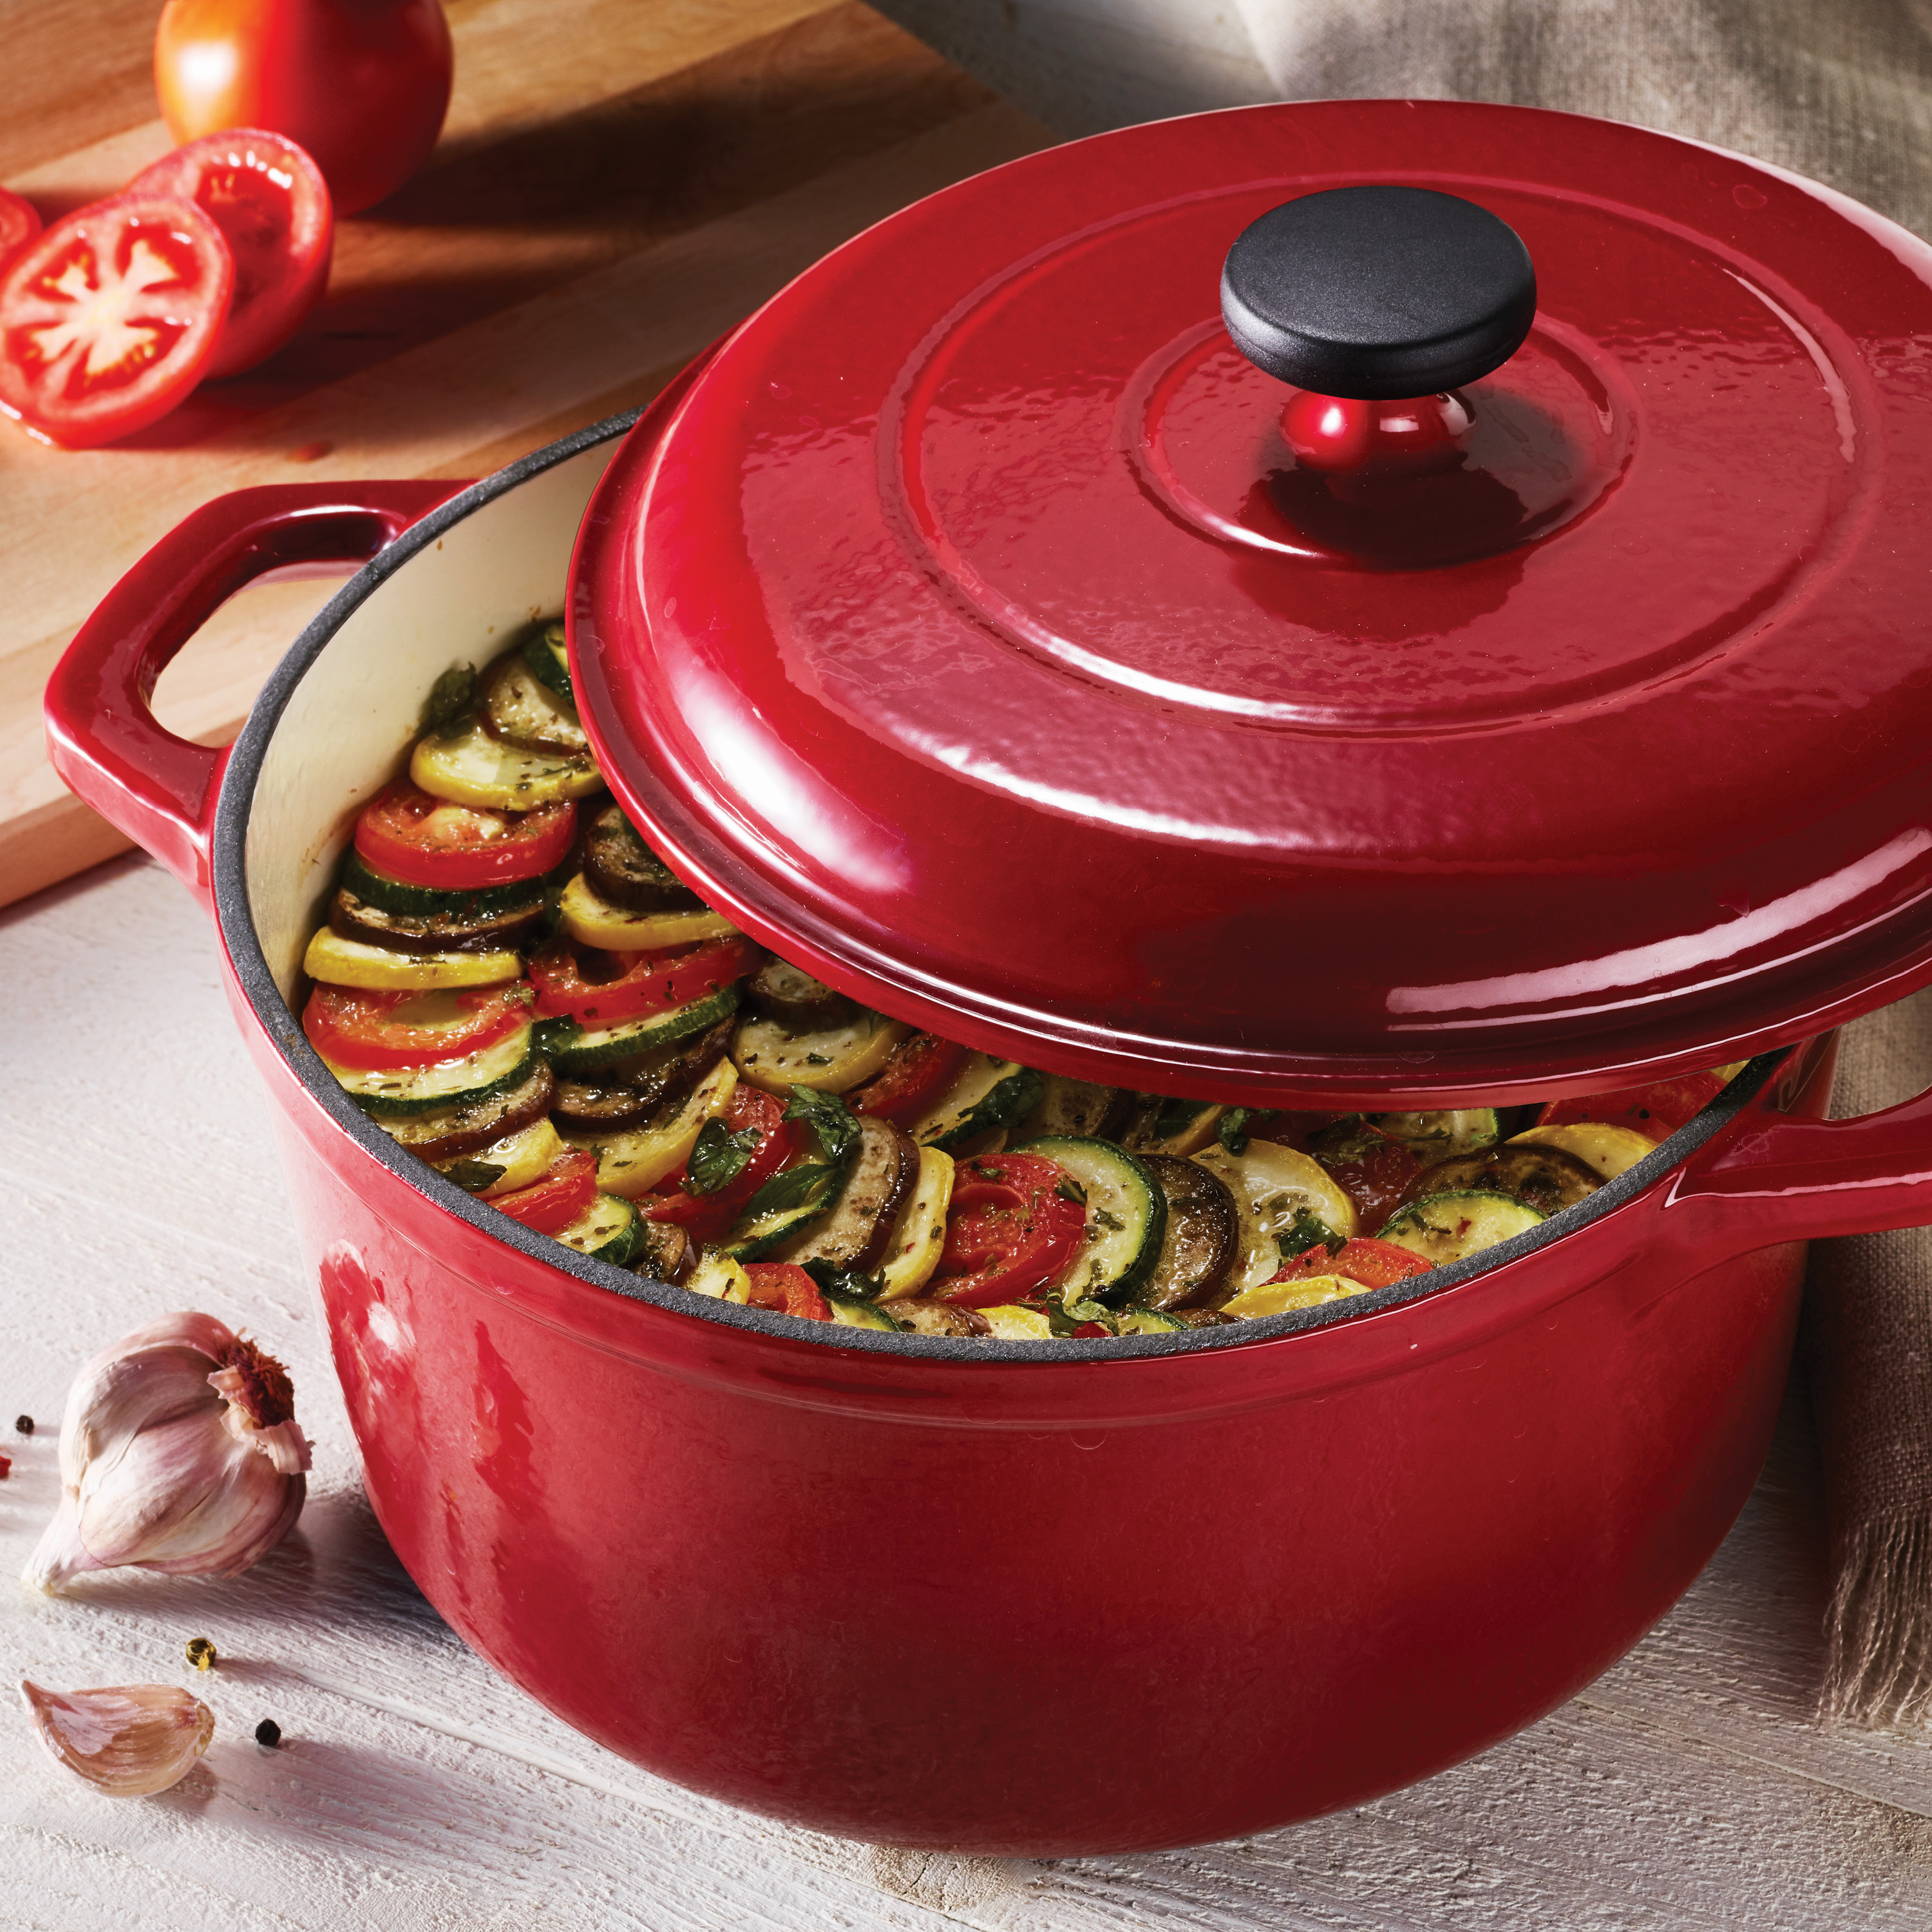 Tramontina Enameled Cast Iron 6.5 Quart Round Dutch Oven, Red - image 5 of 7